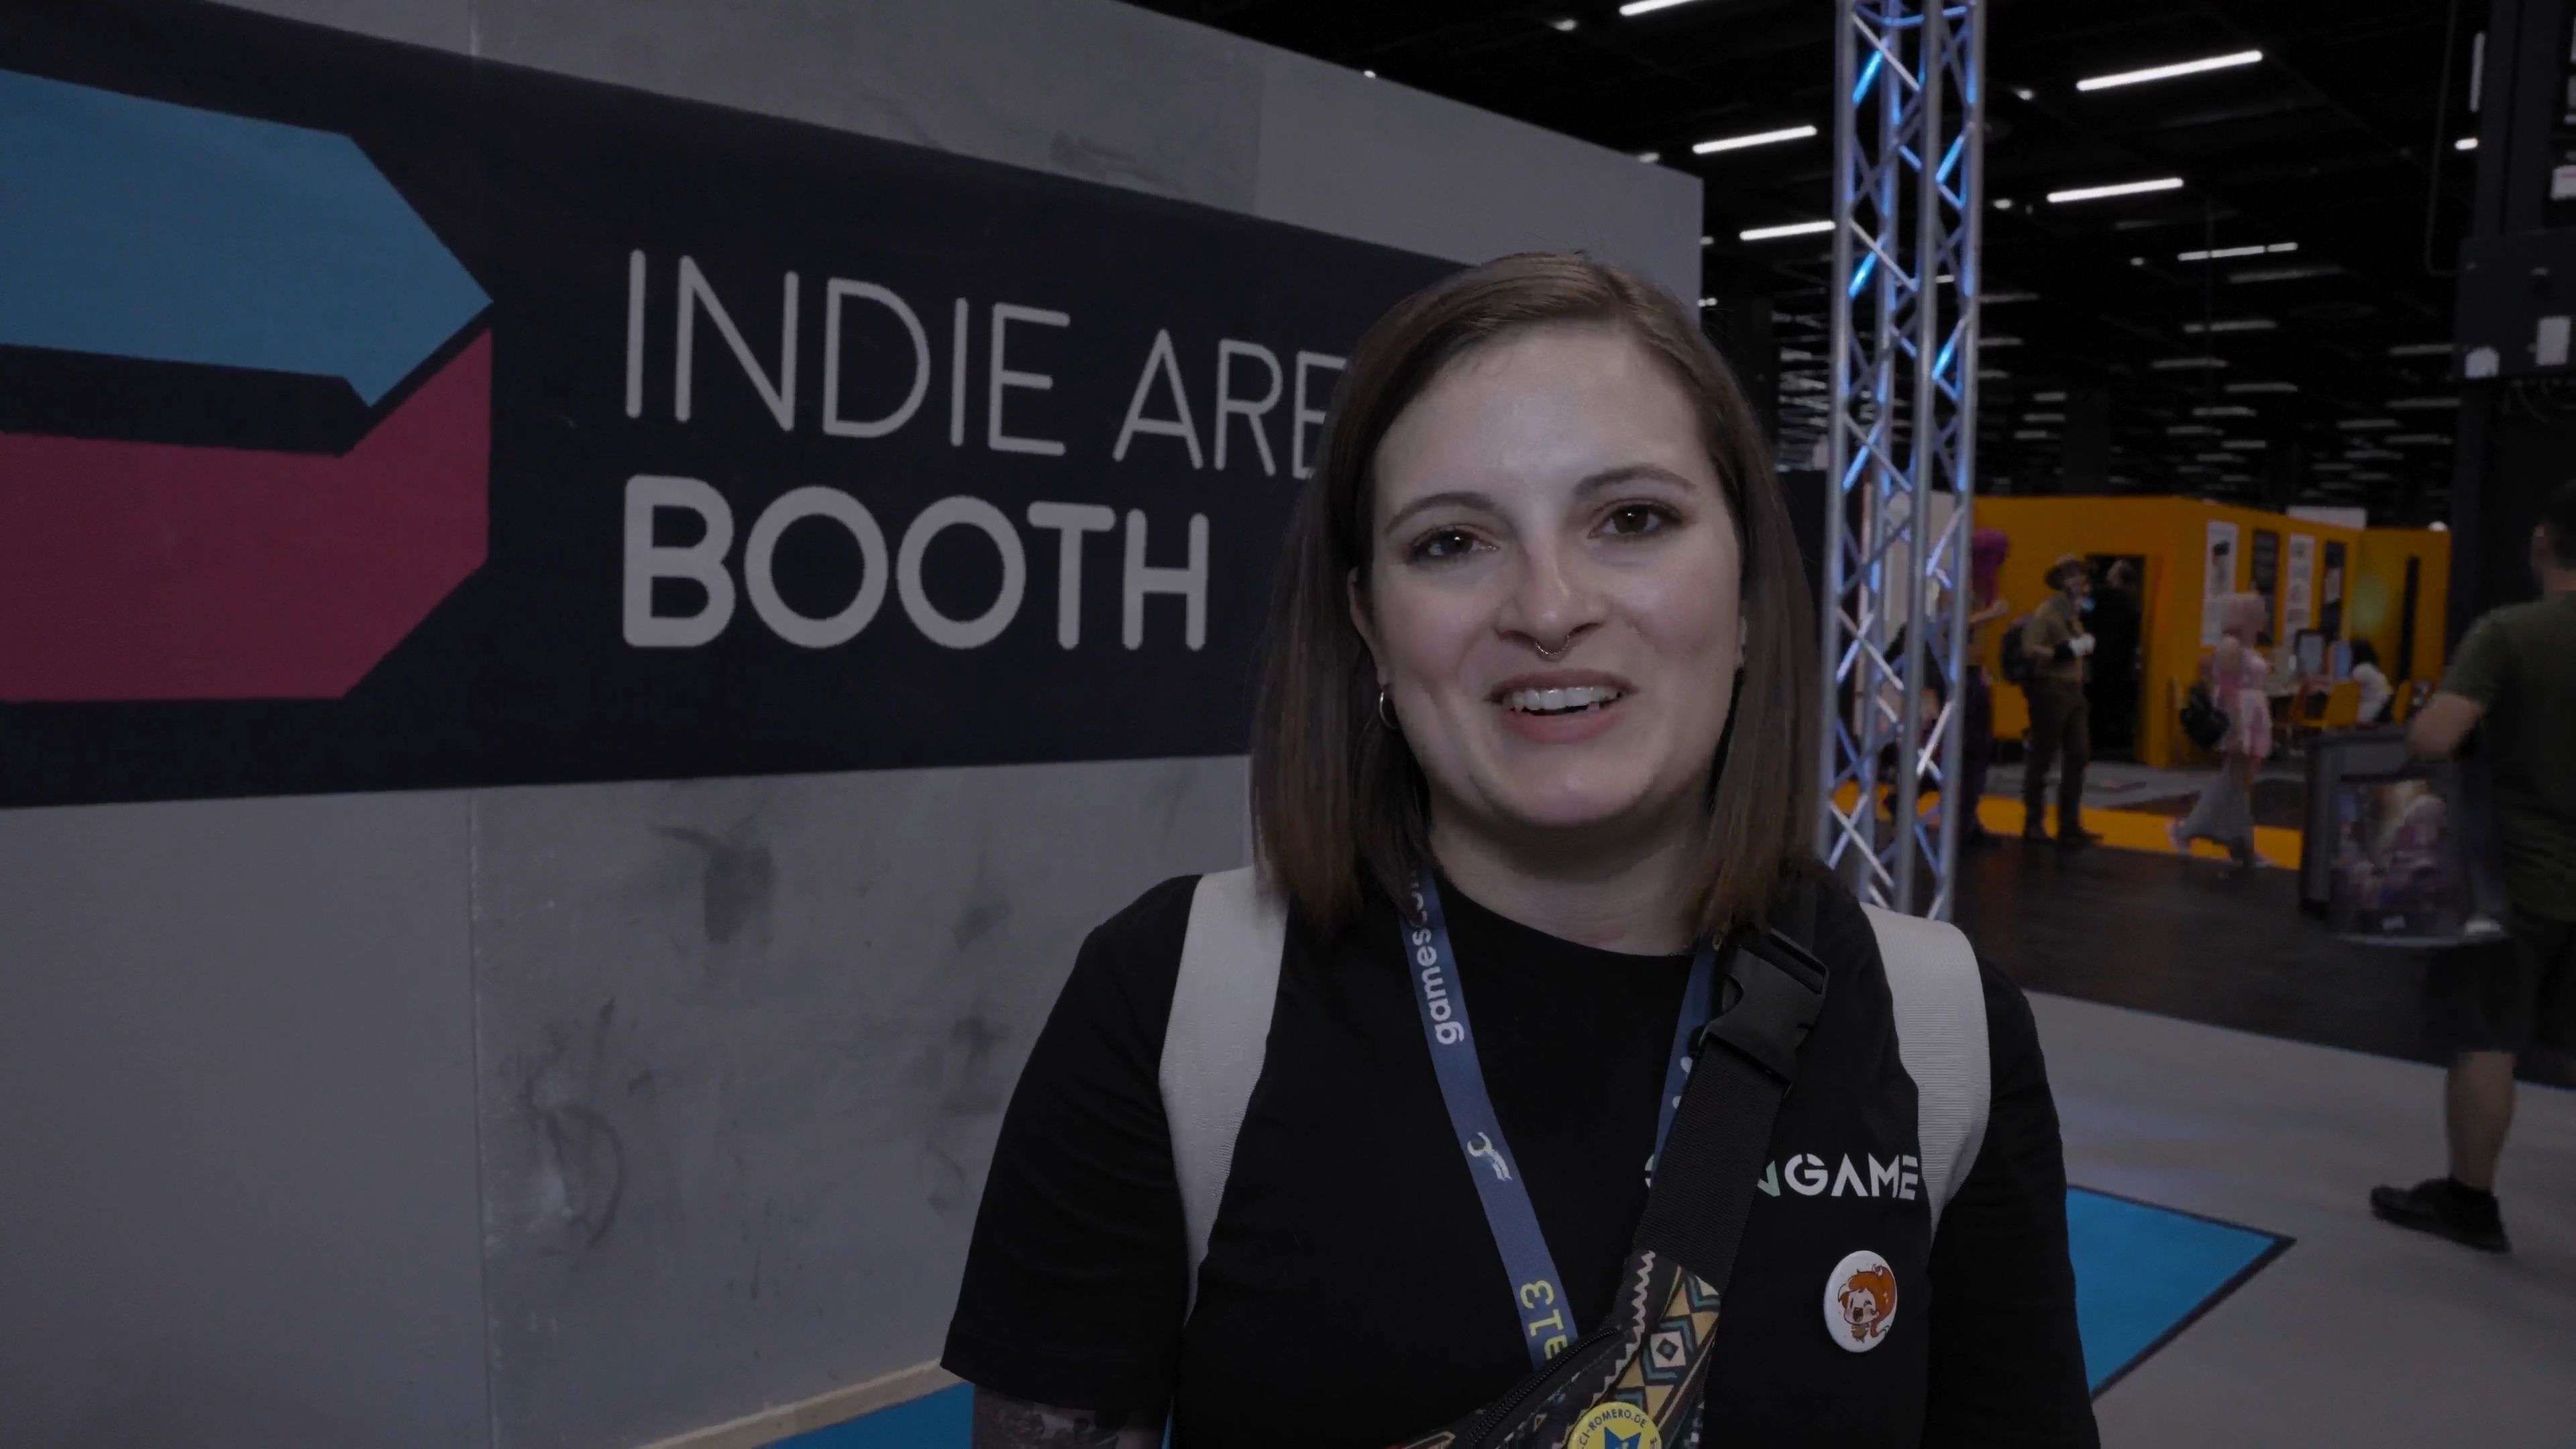 Gamescom 2022: Small games, big love - Indie Arena Booth inspires thousands of fans